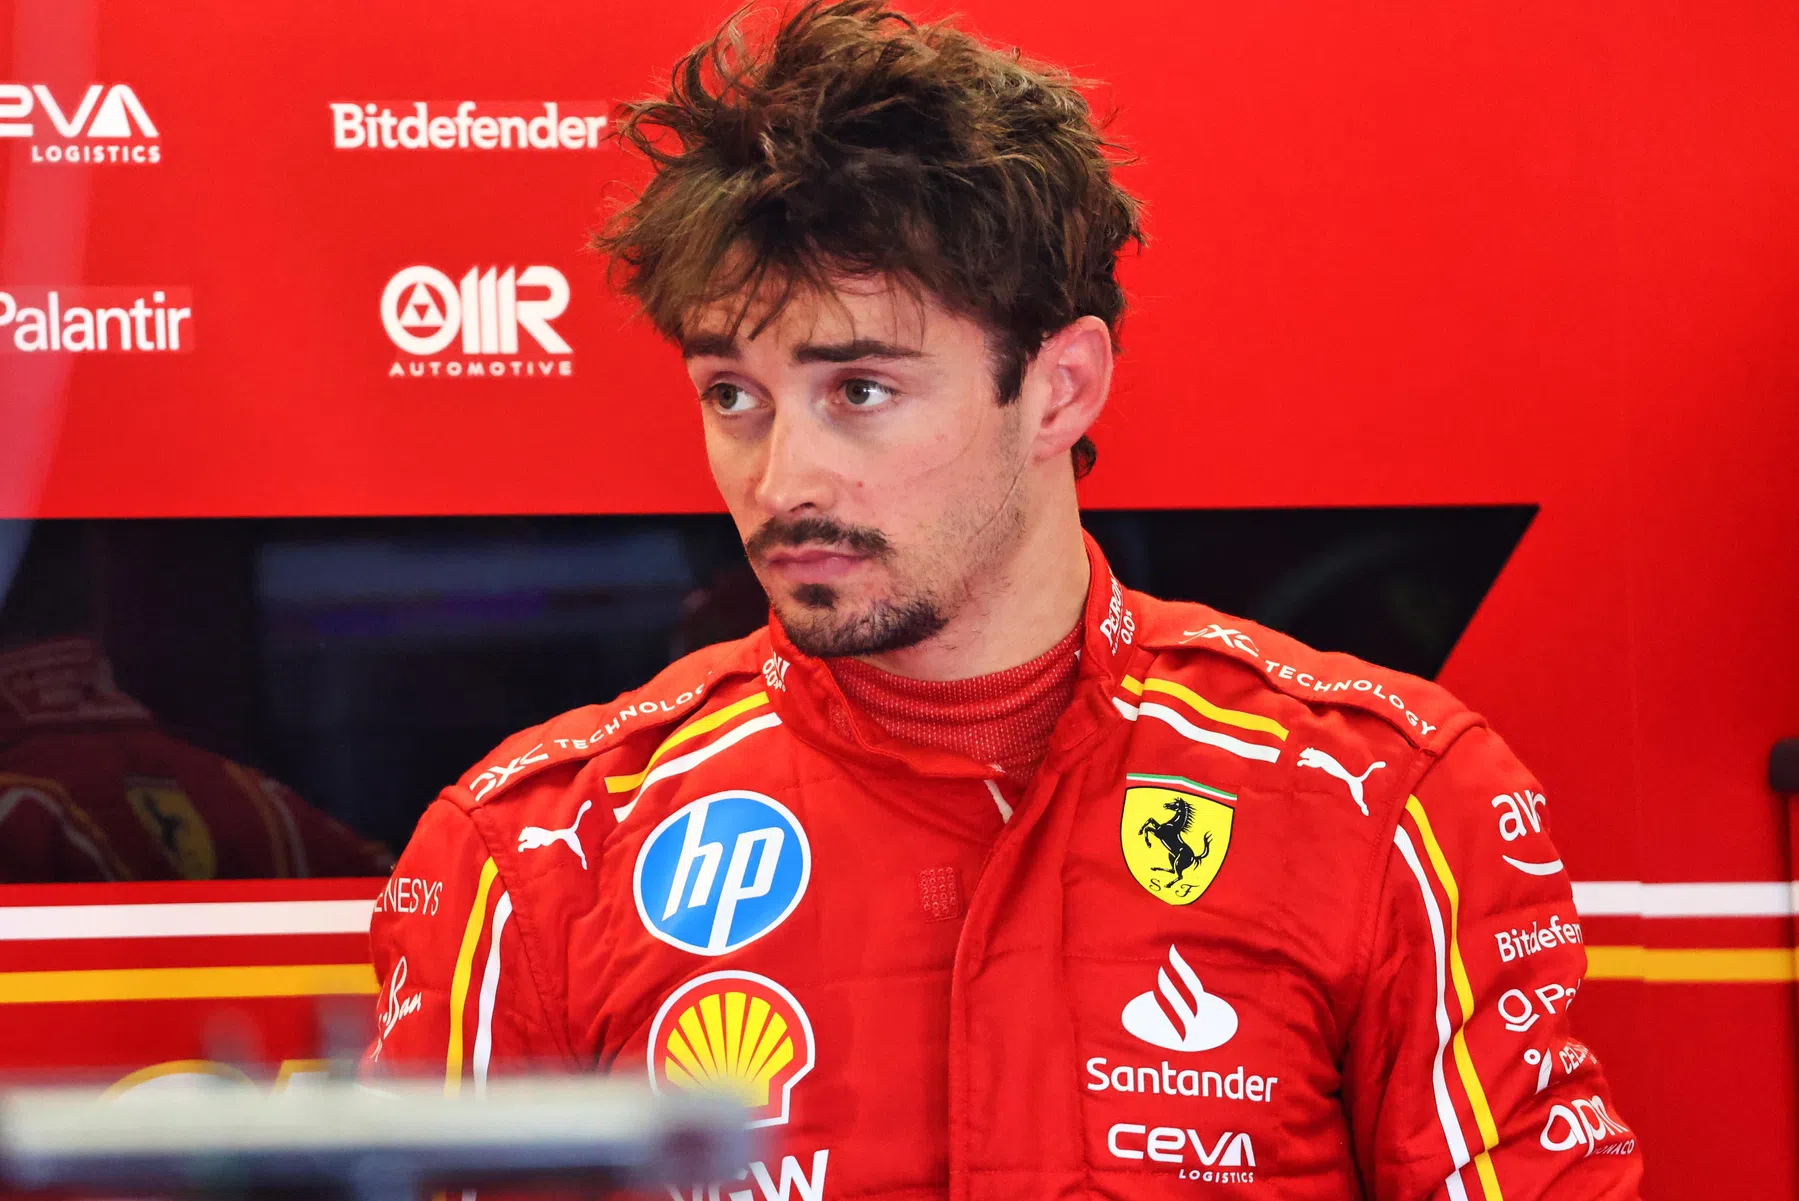 Charles Leclerc on his Friday in imola